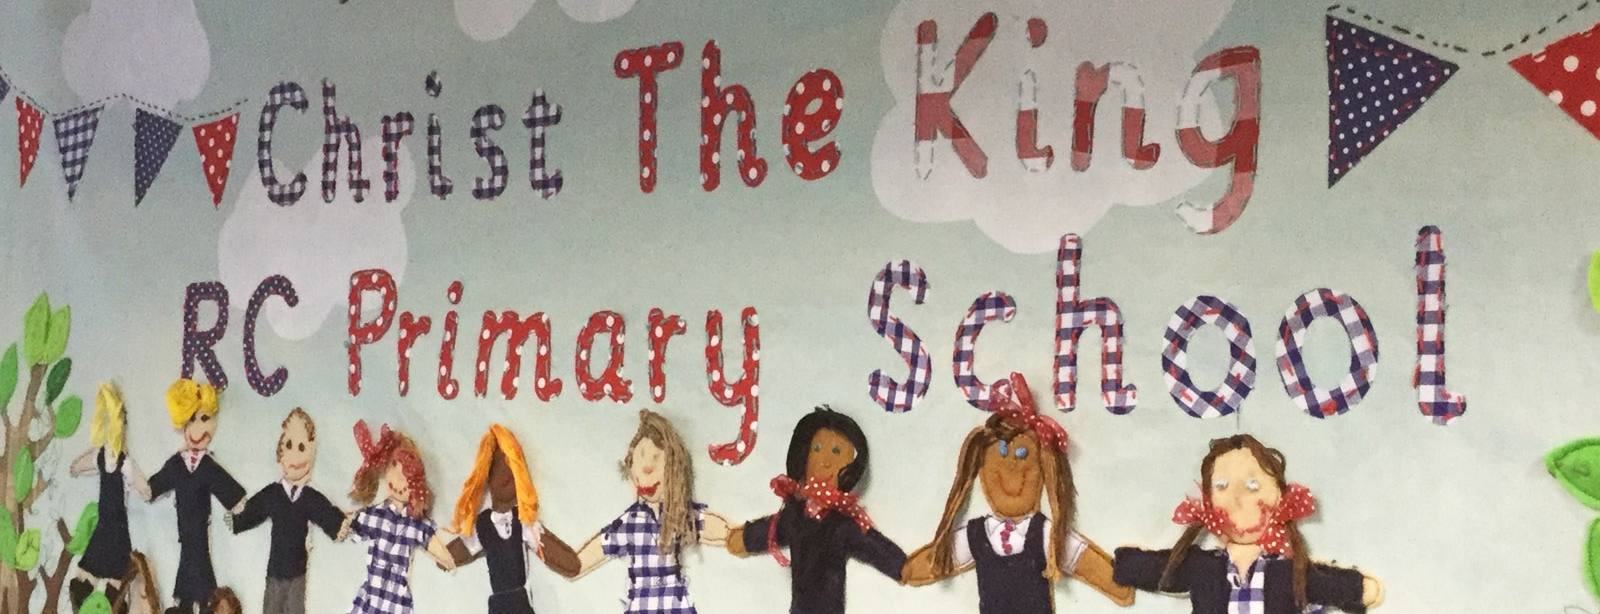 Christ The King RC Primary School wall art